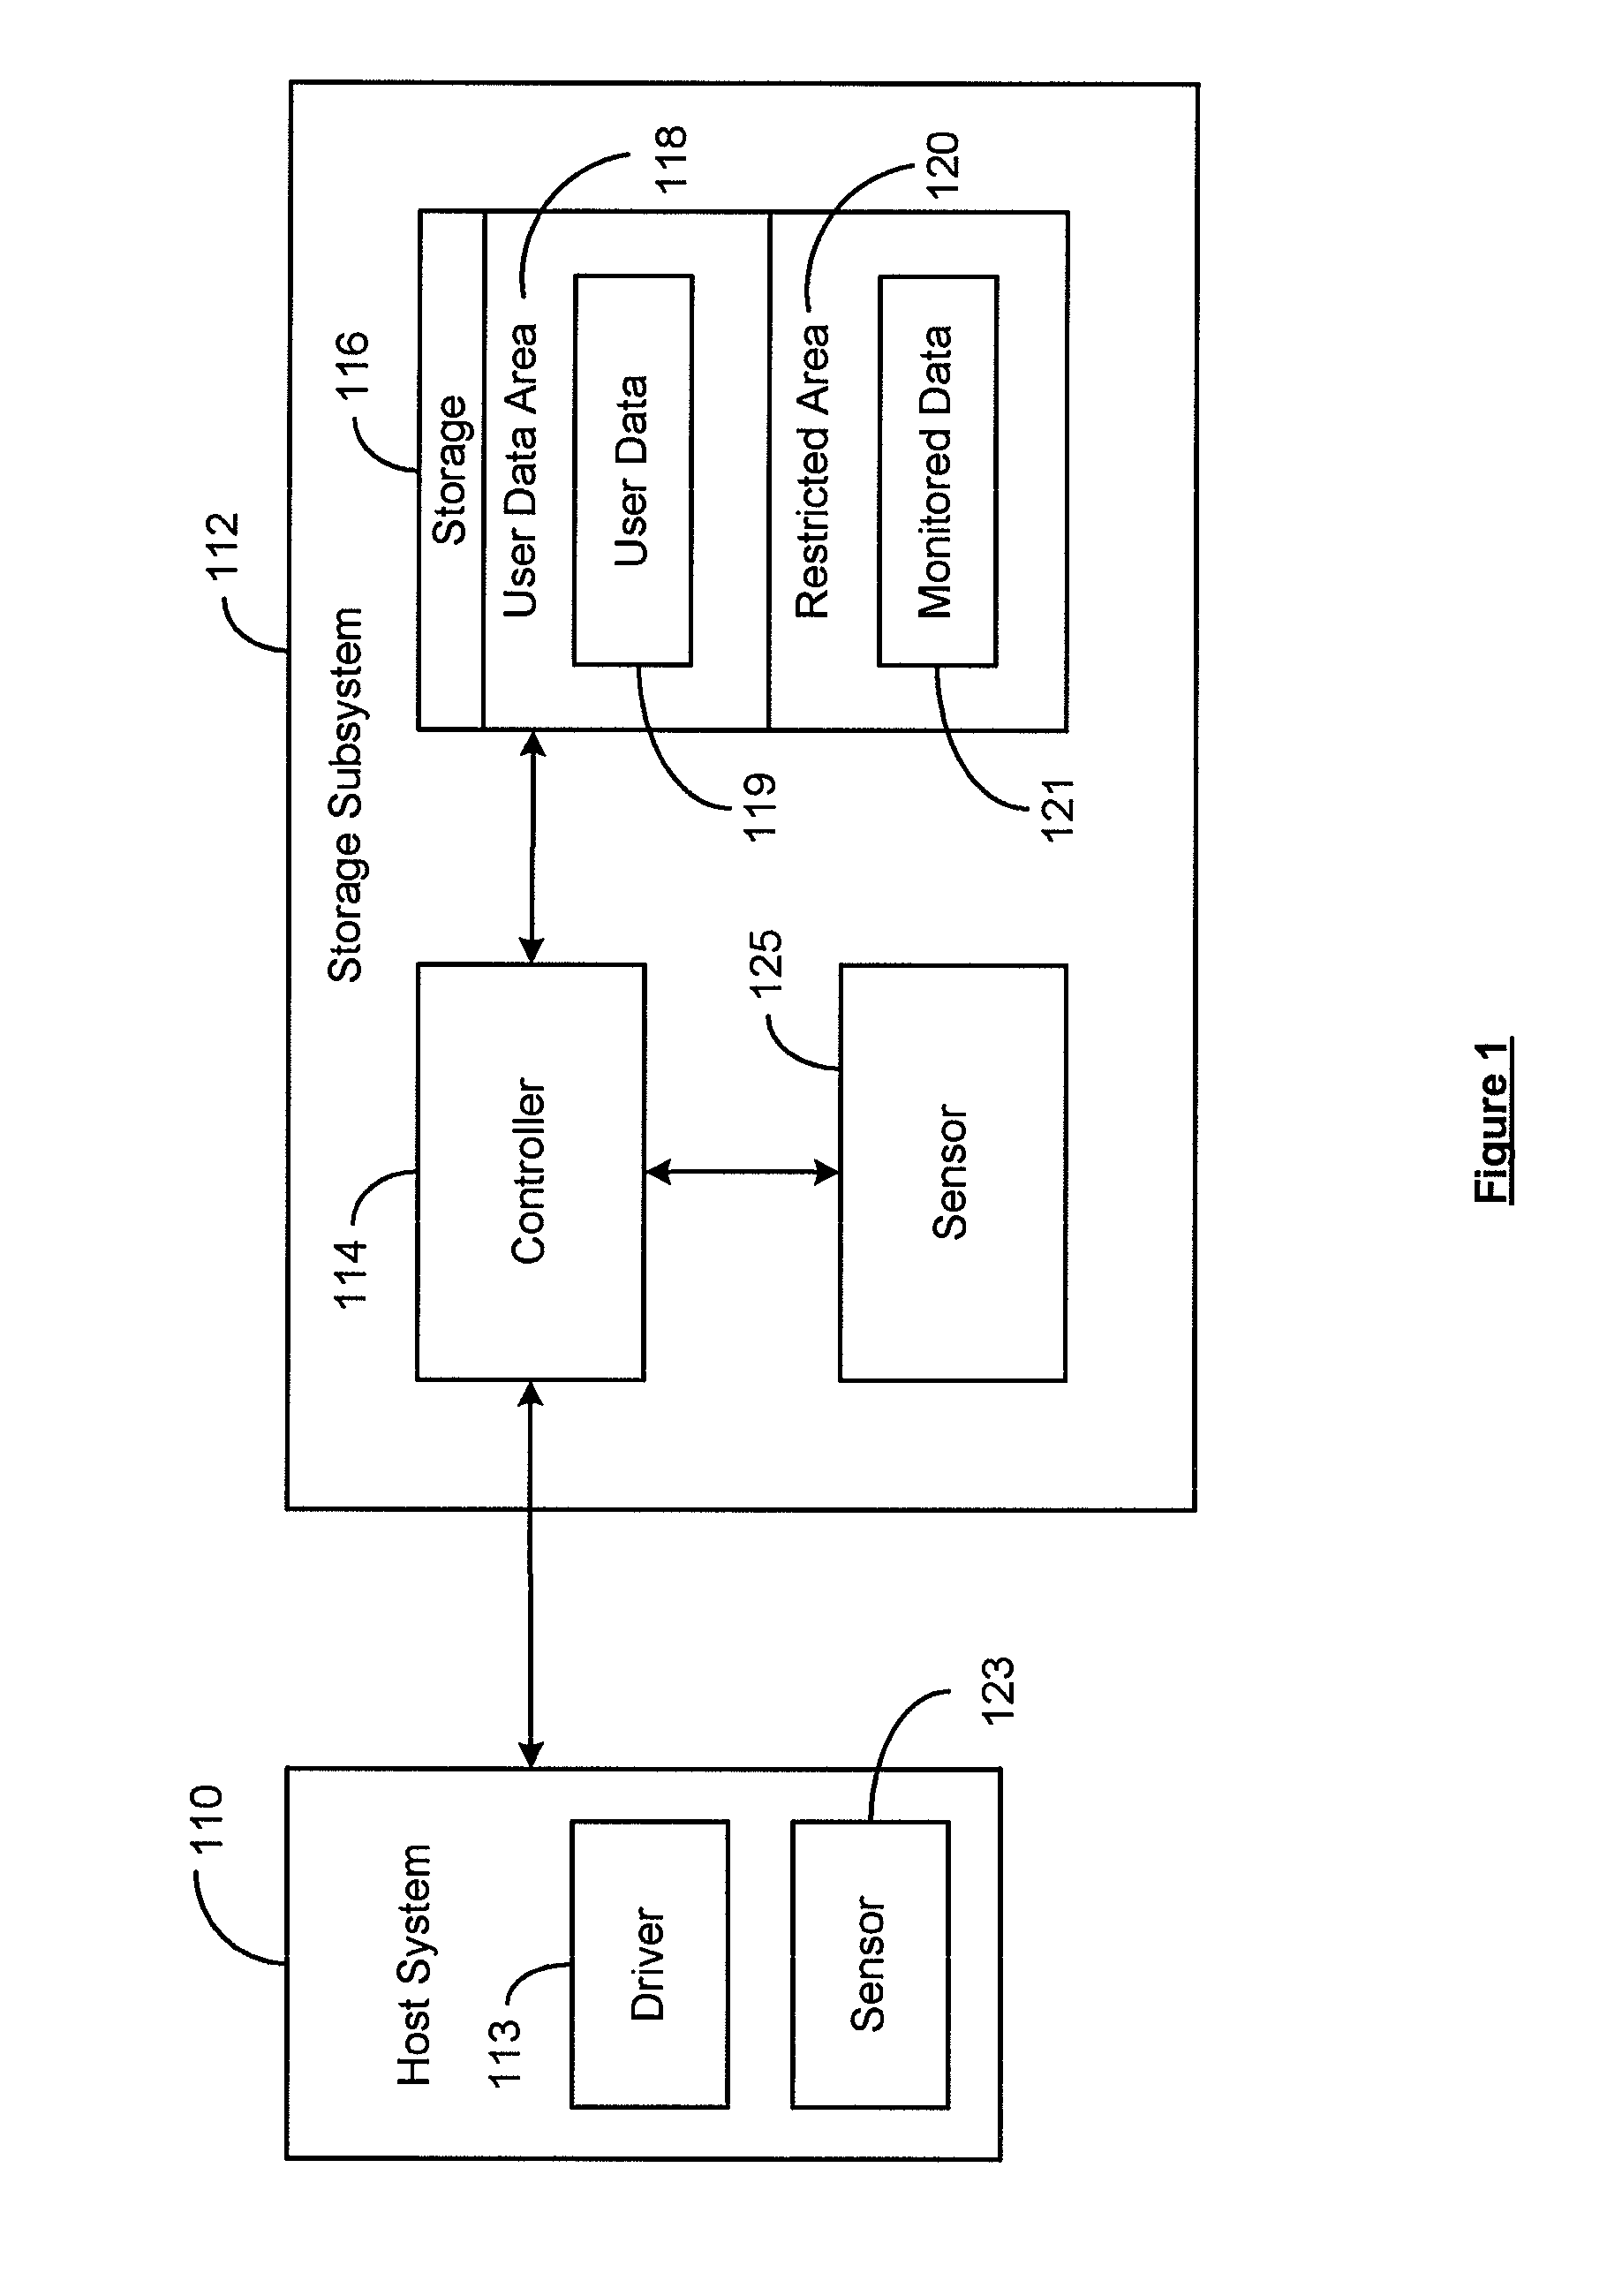 Solid state storage subsystem that maintains and provides access to data reflective of a failure risk